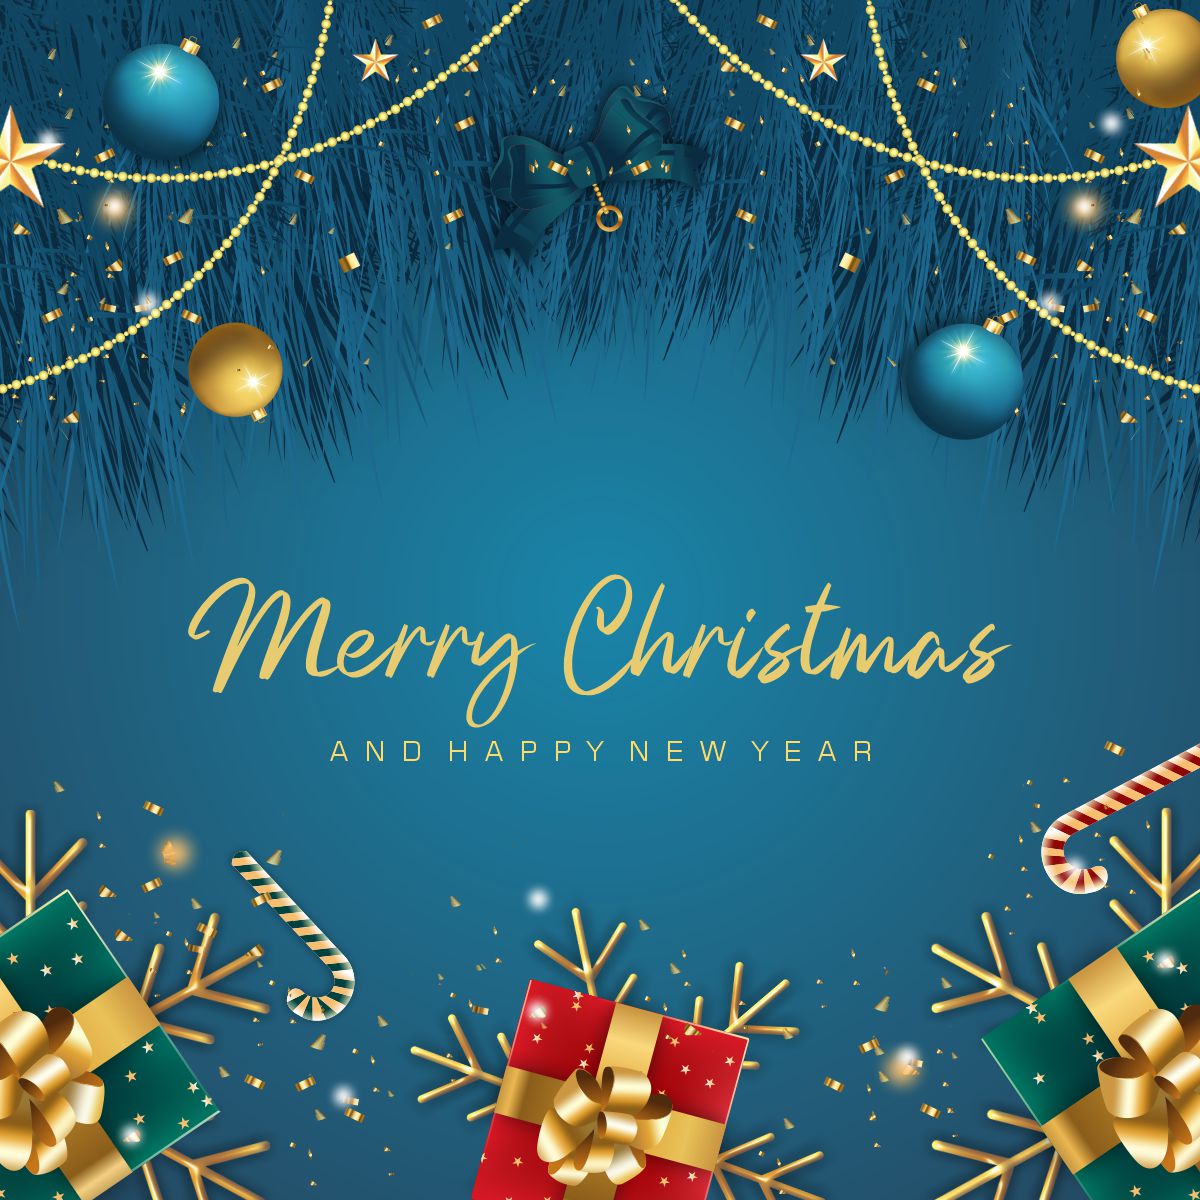 Download Realistic Christmas Background With Green Branches Free Premium  Vector | CorelDraw Design (Download Free CDR, Vector, Stock Images,  Tutorials, Tips & Tricks)